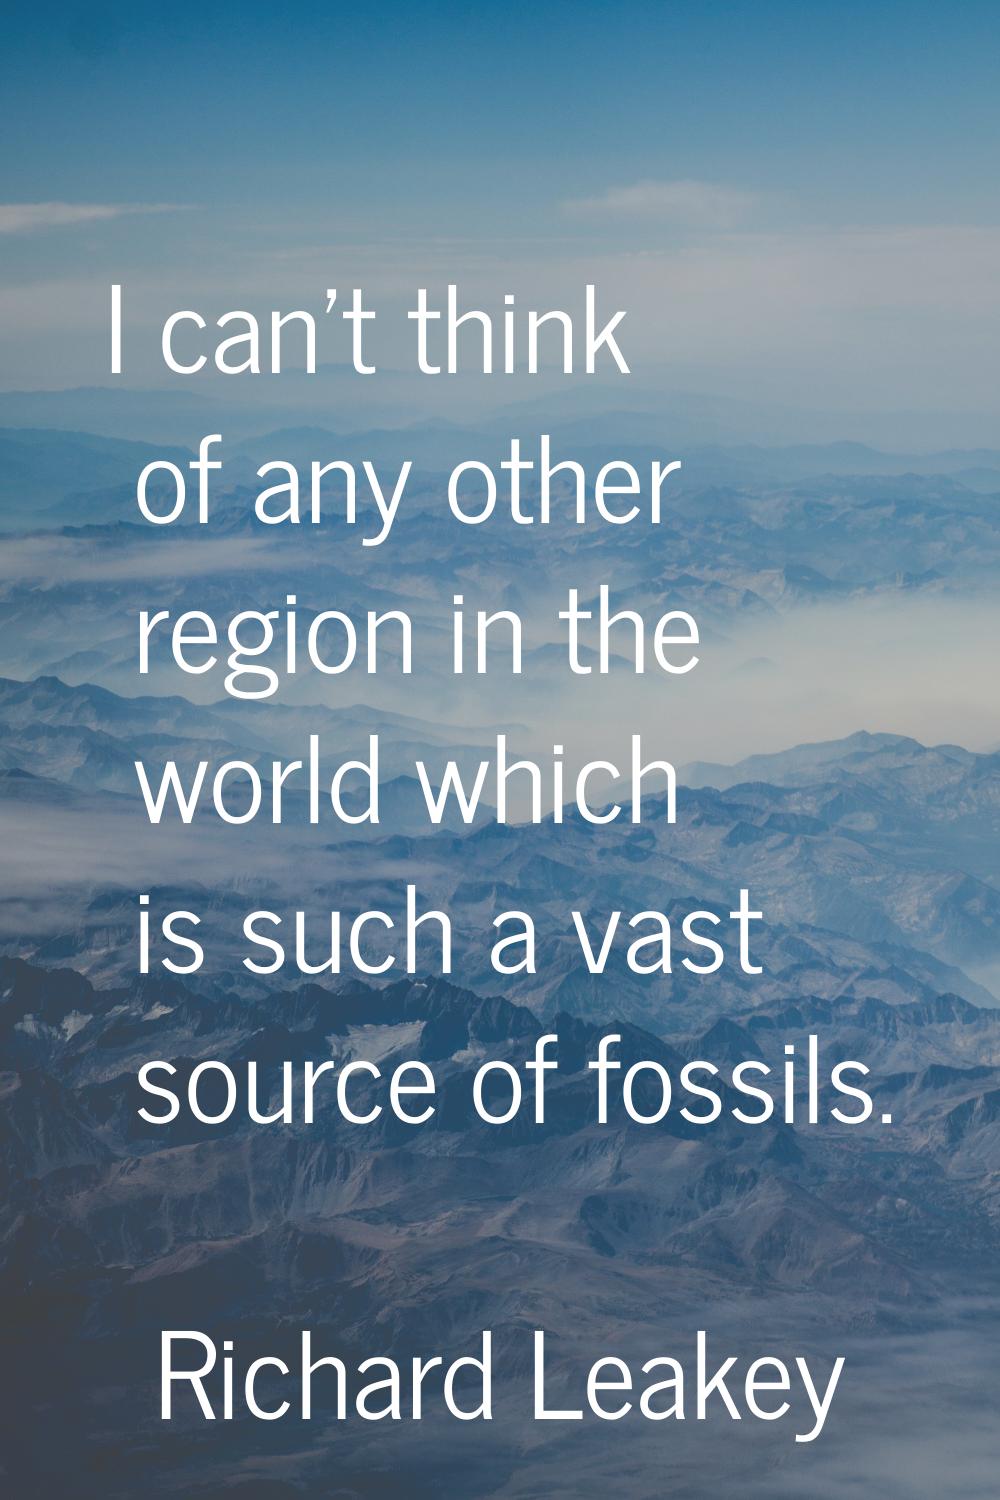 I can't think of any other region in the world which is such a vast source of fossils.